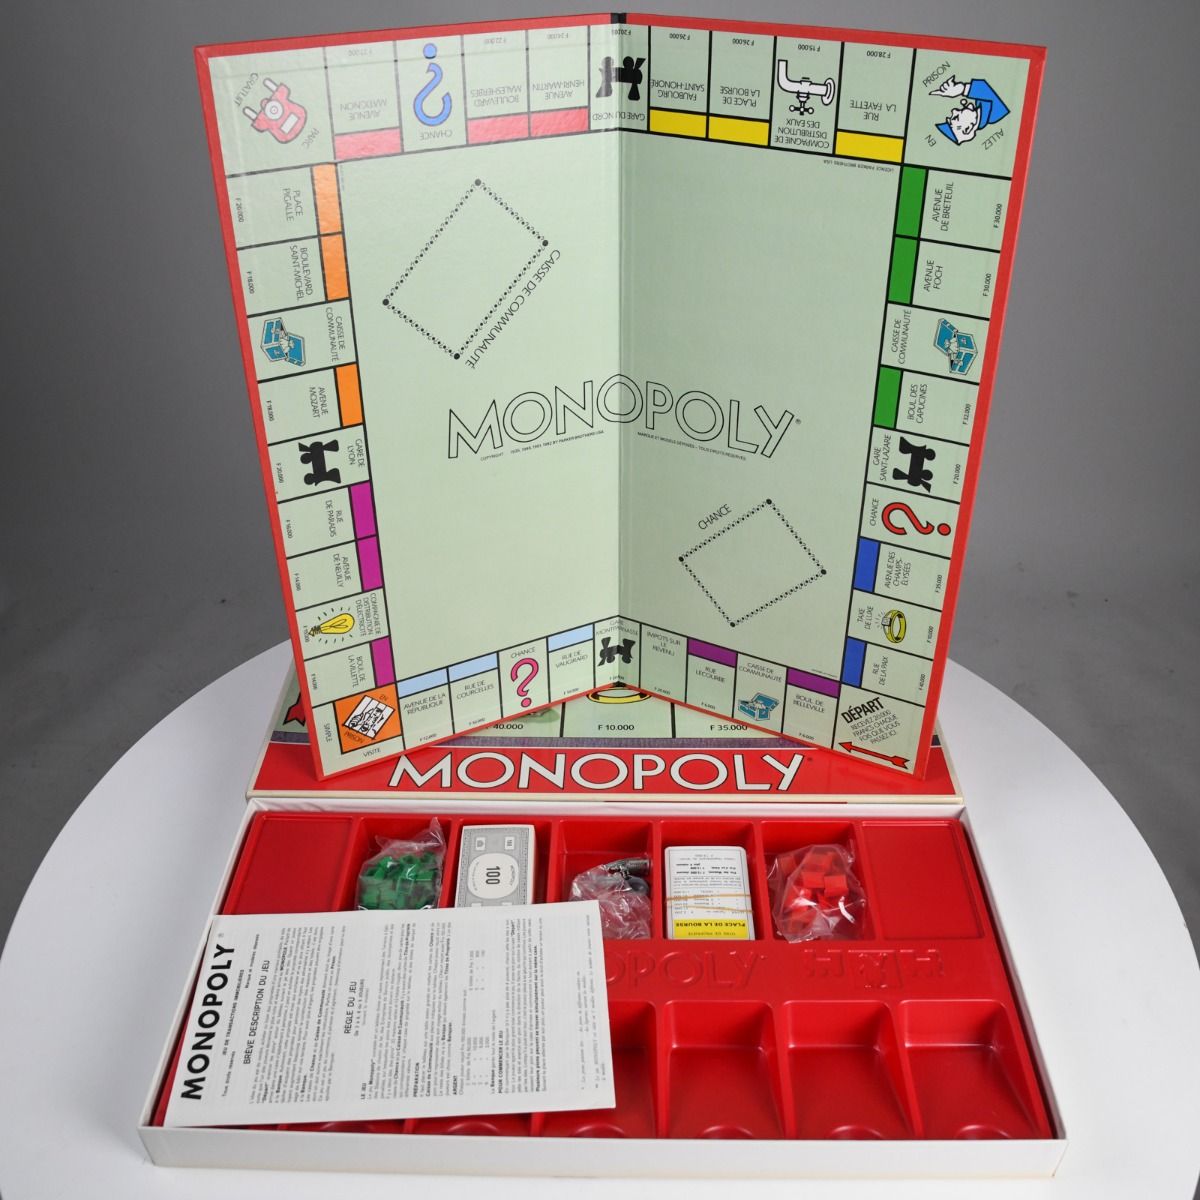 'Monopoly' 1985 French Language Board Game